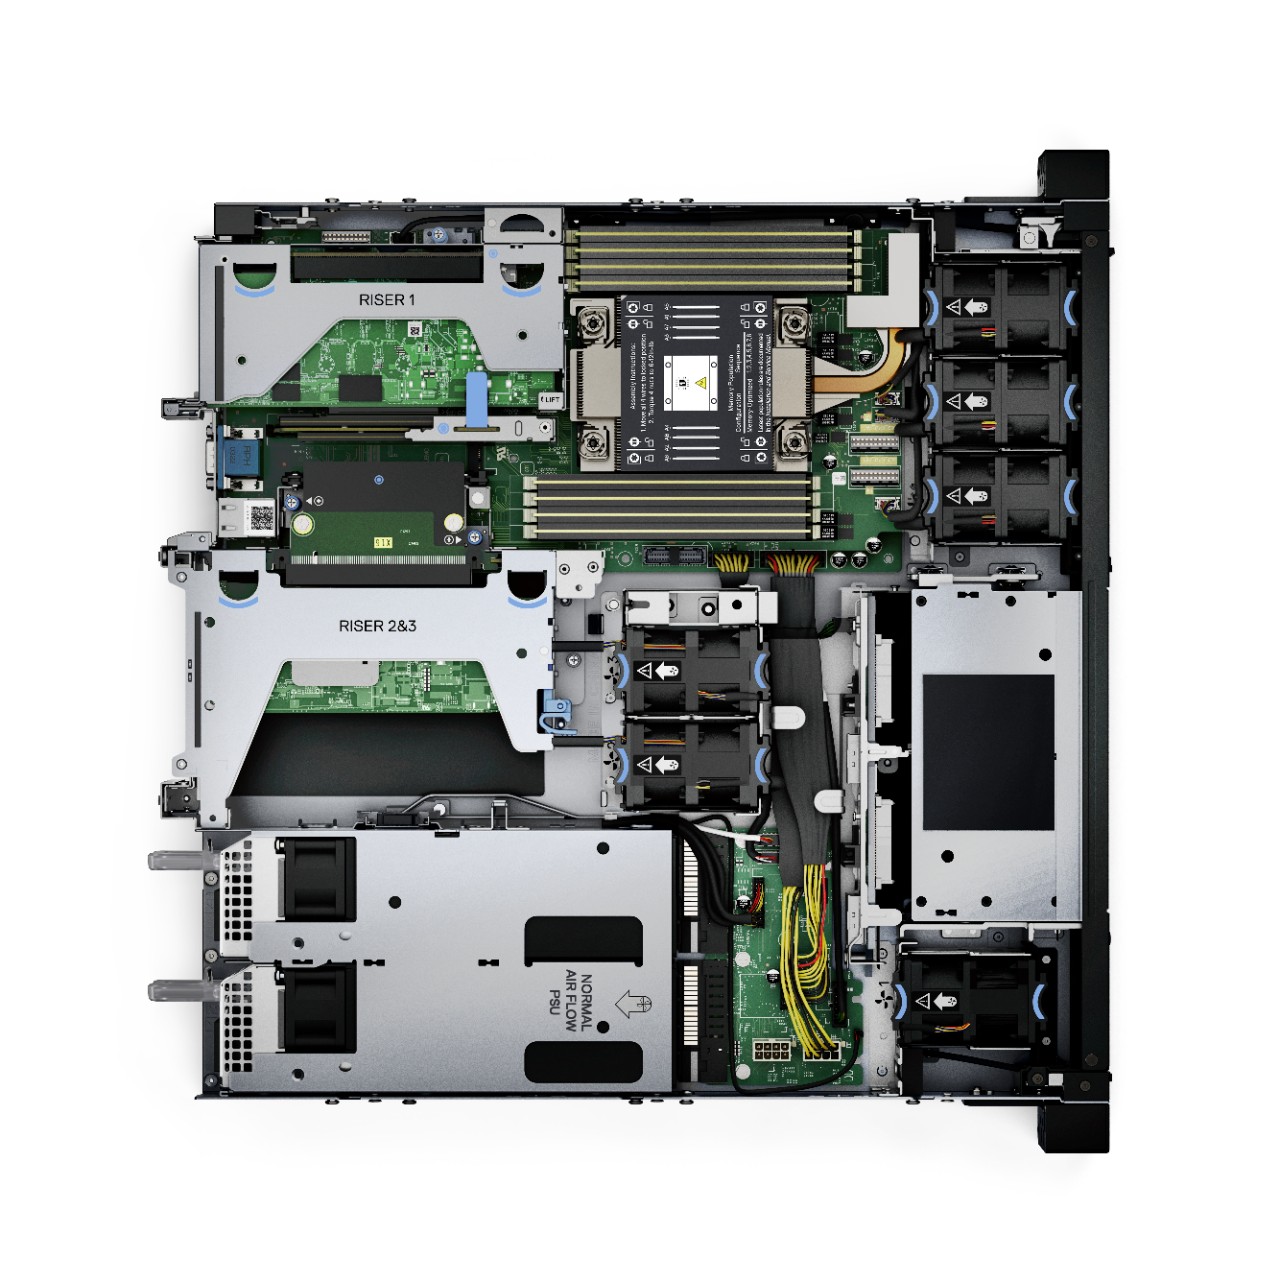 Hardware Spotlight: Dell XR11 – datacentre performance in a compact, rugged server